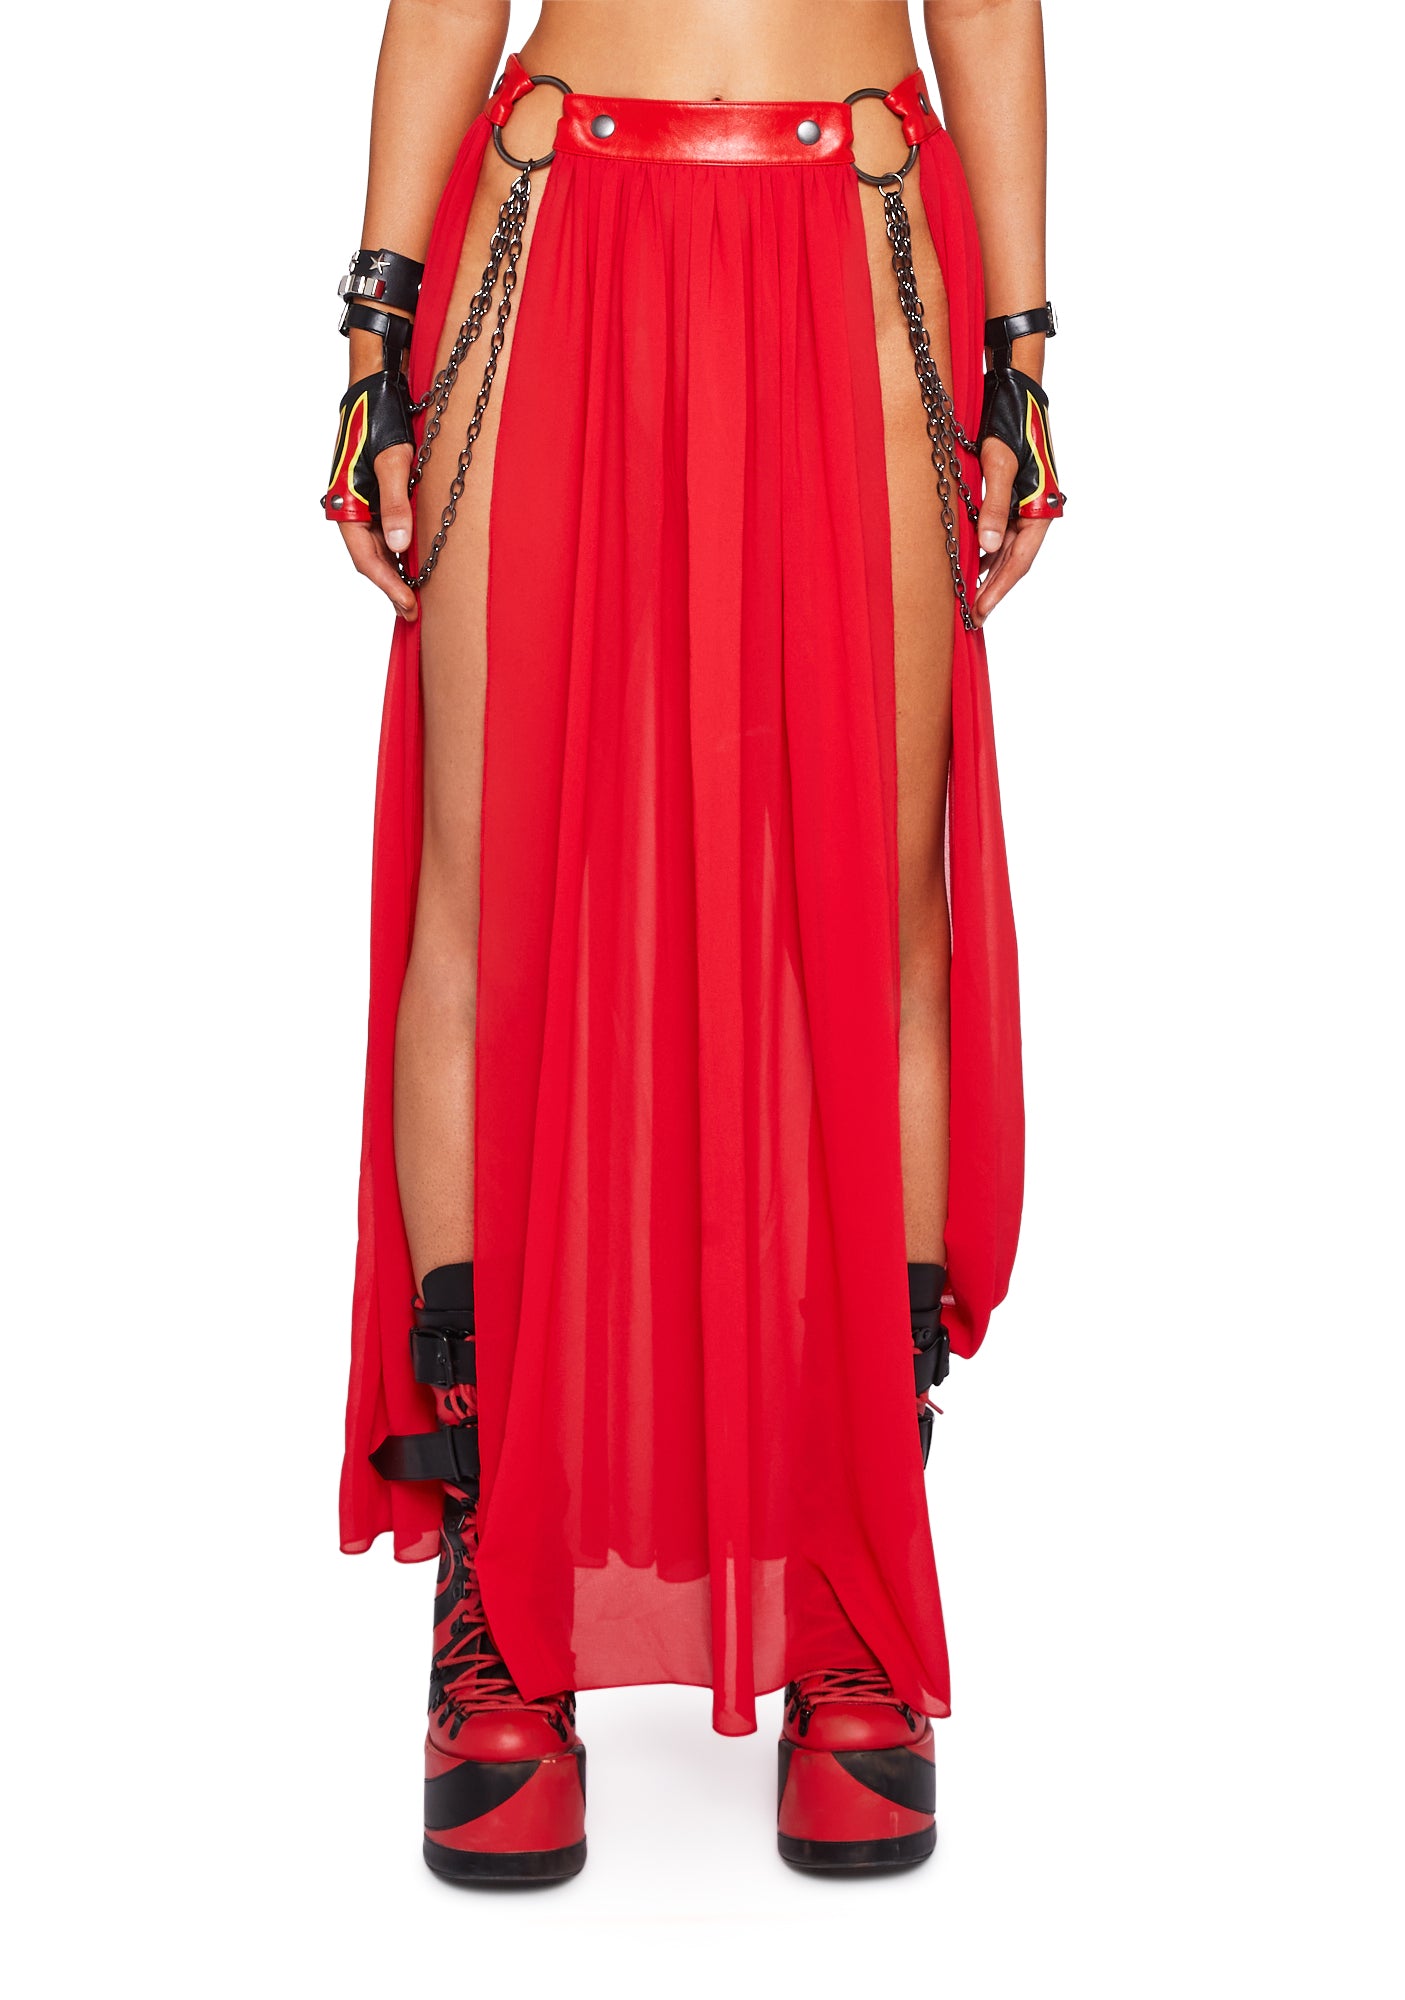 Club Exx Chiffon Maxi Skirt With Front Slits And Chain Straps - Red ...